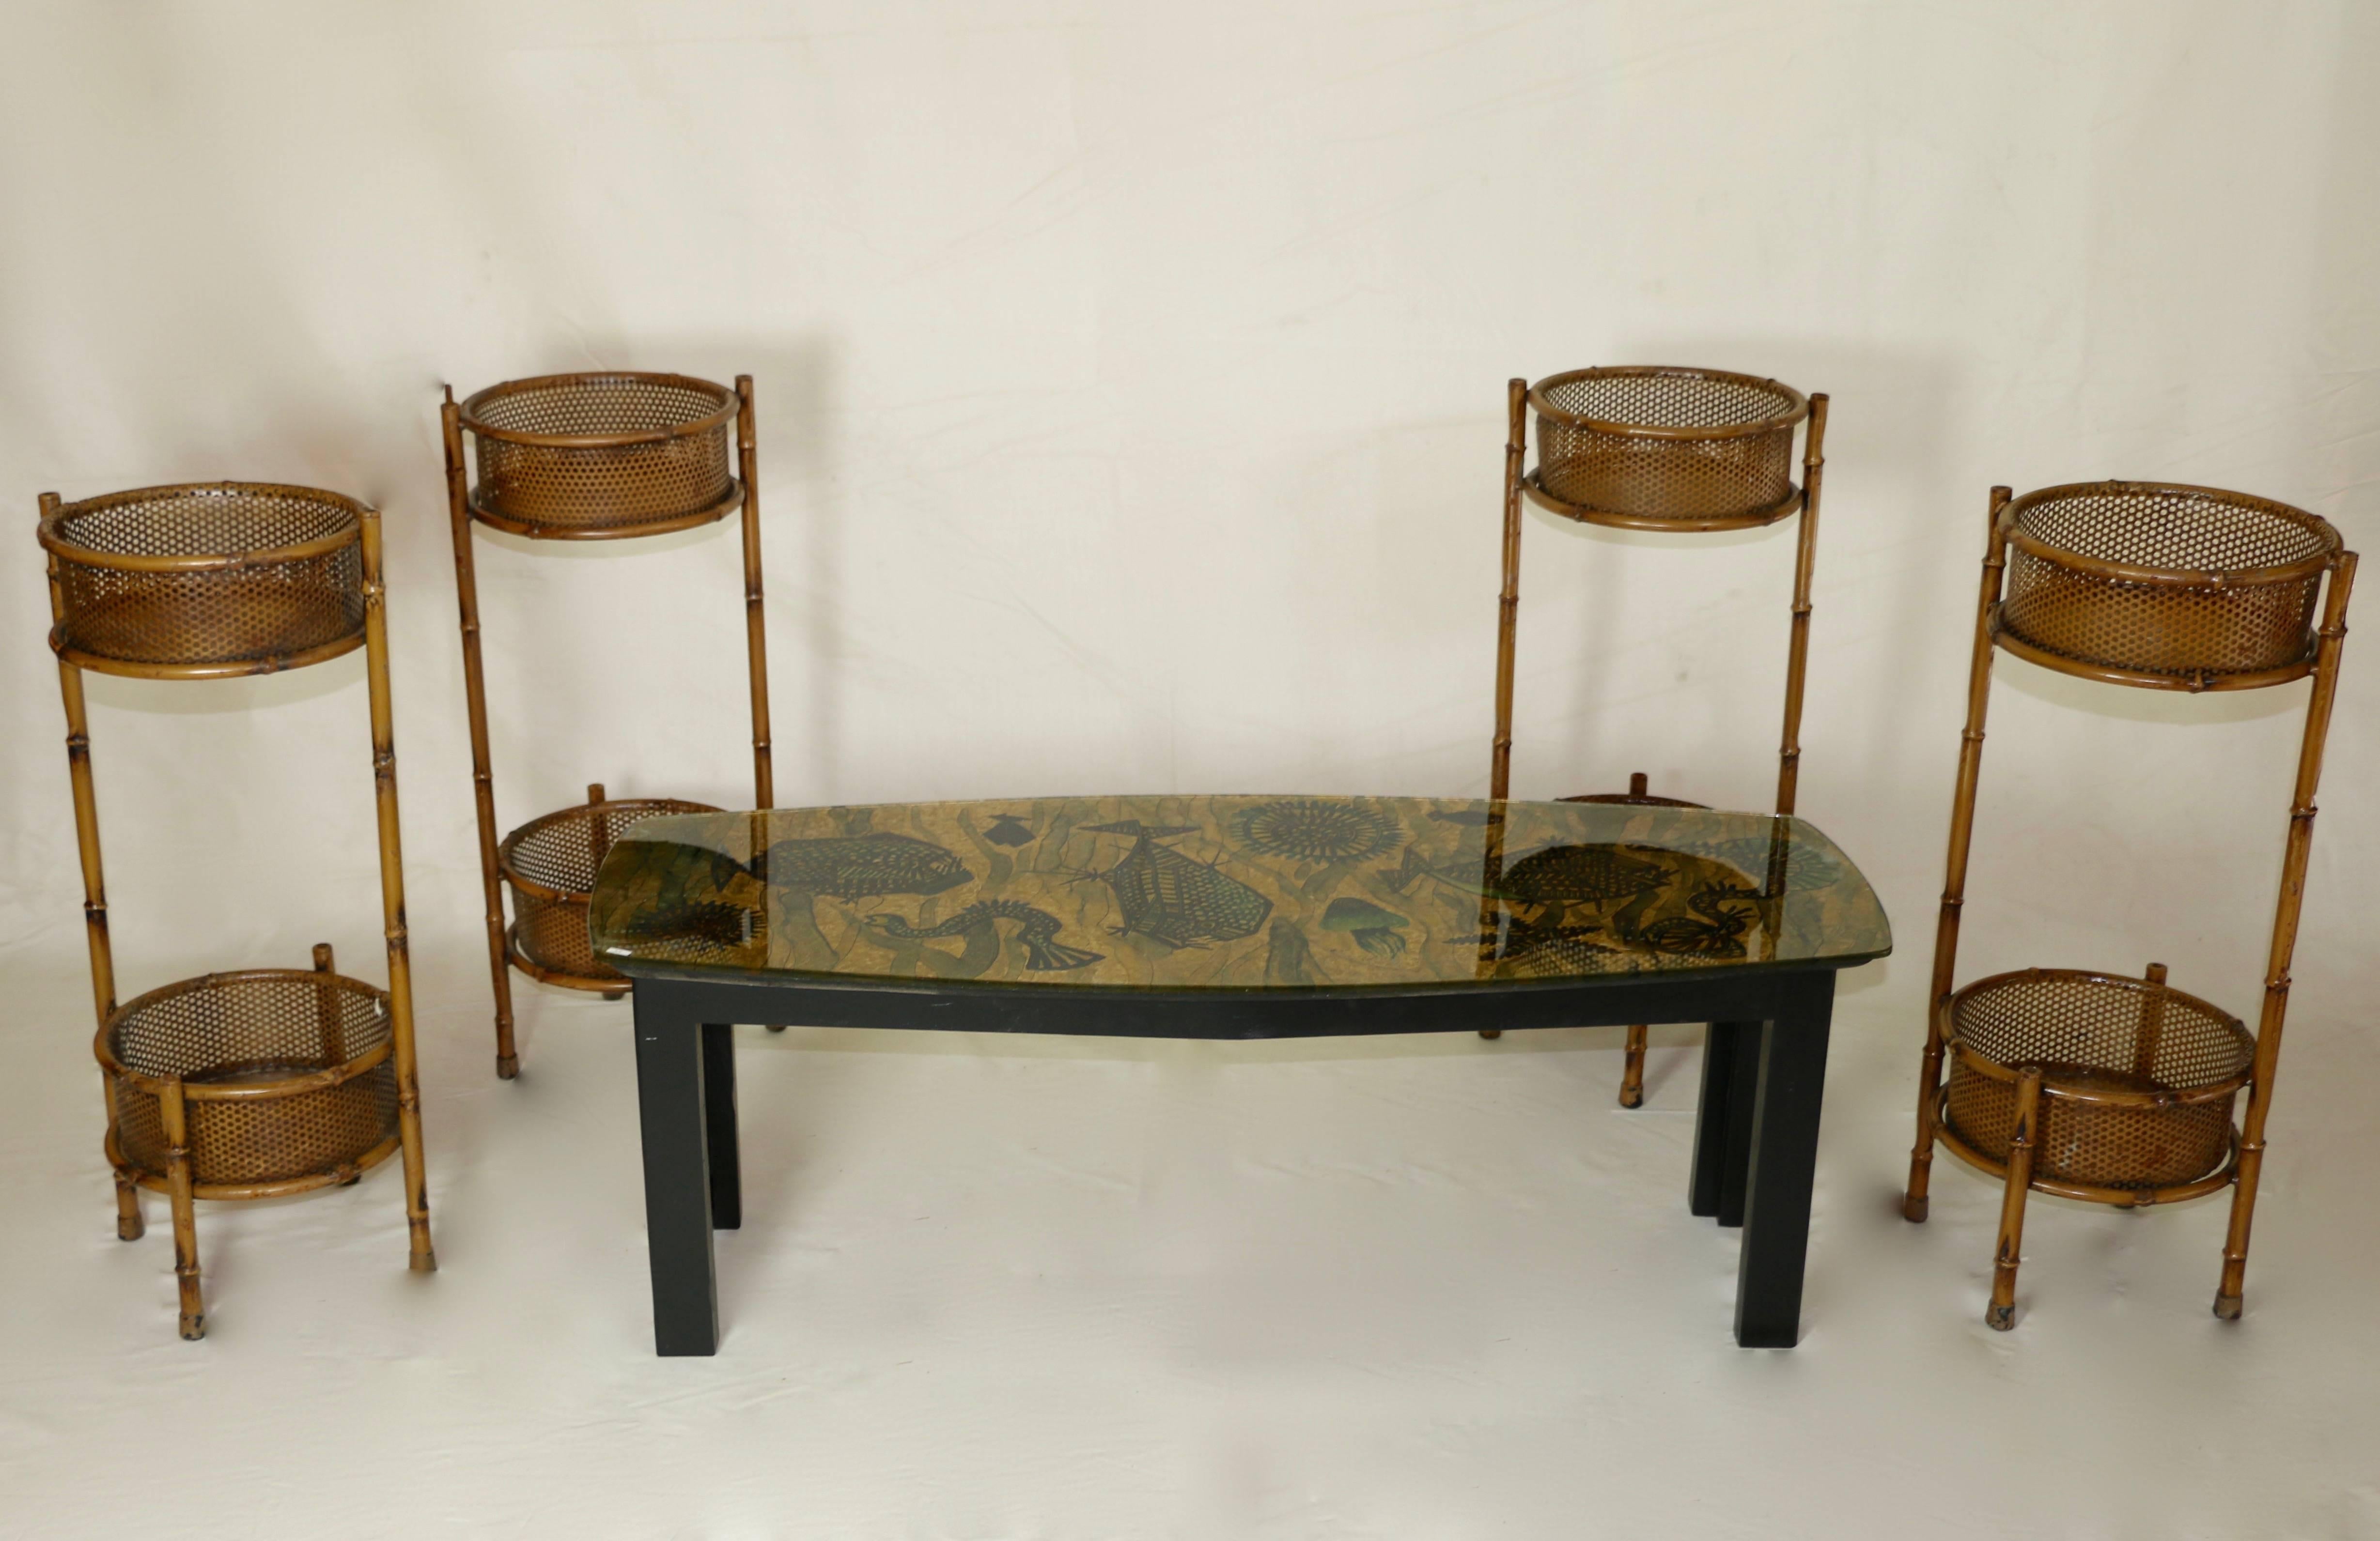 1960s.
Glass top decorated with underwater motifs coffee table. Black painted wood base.